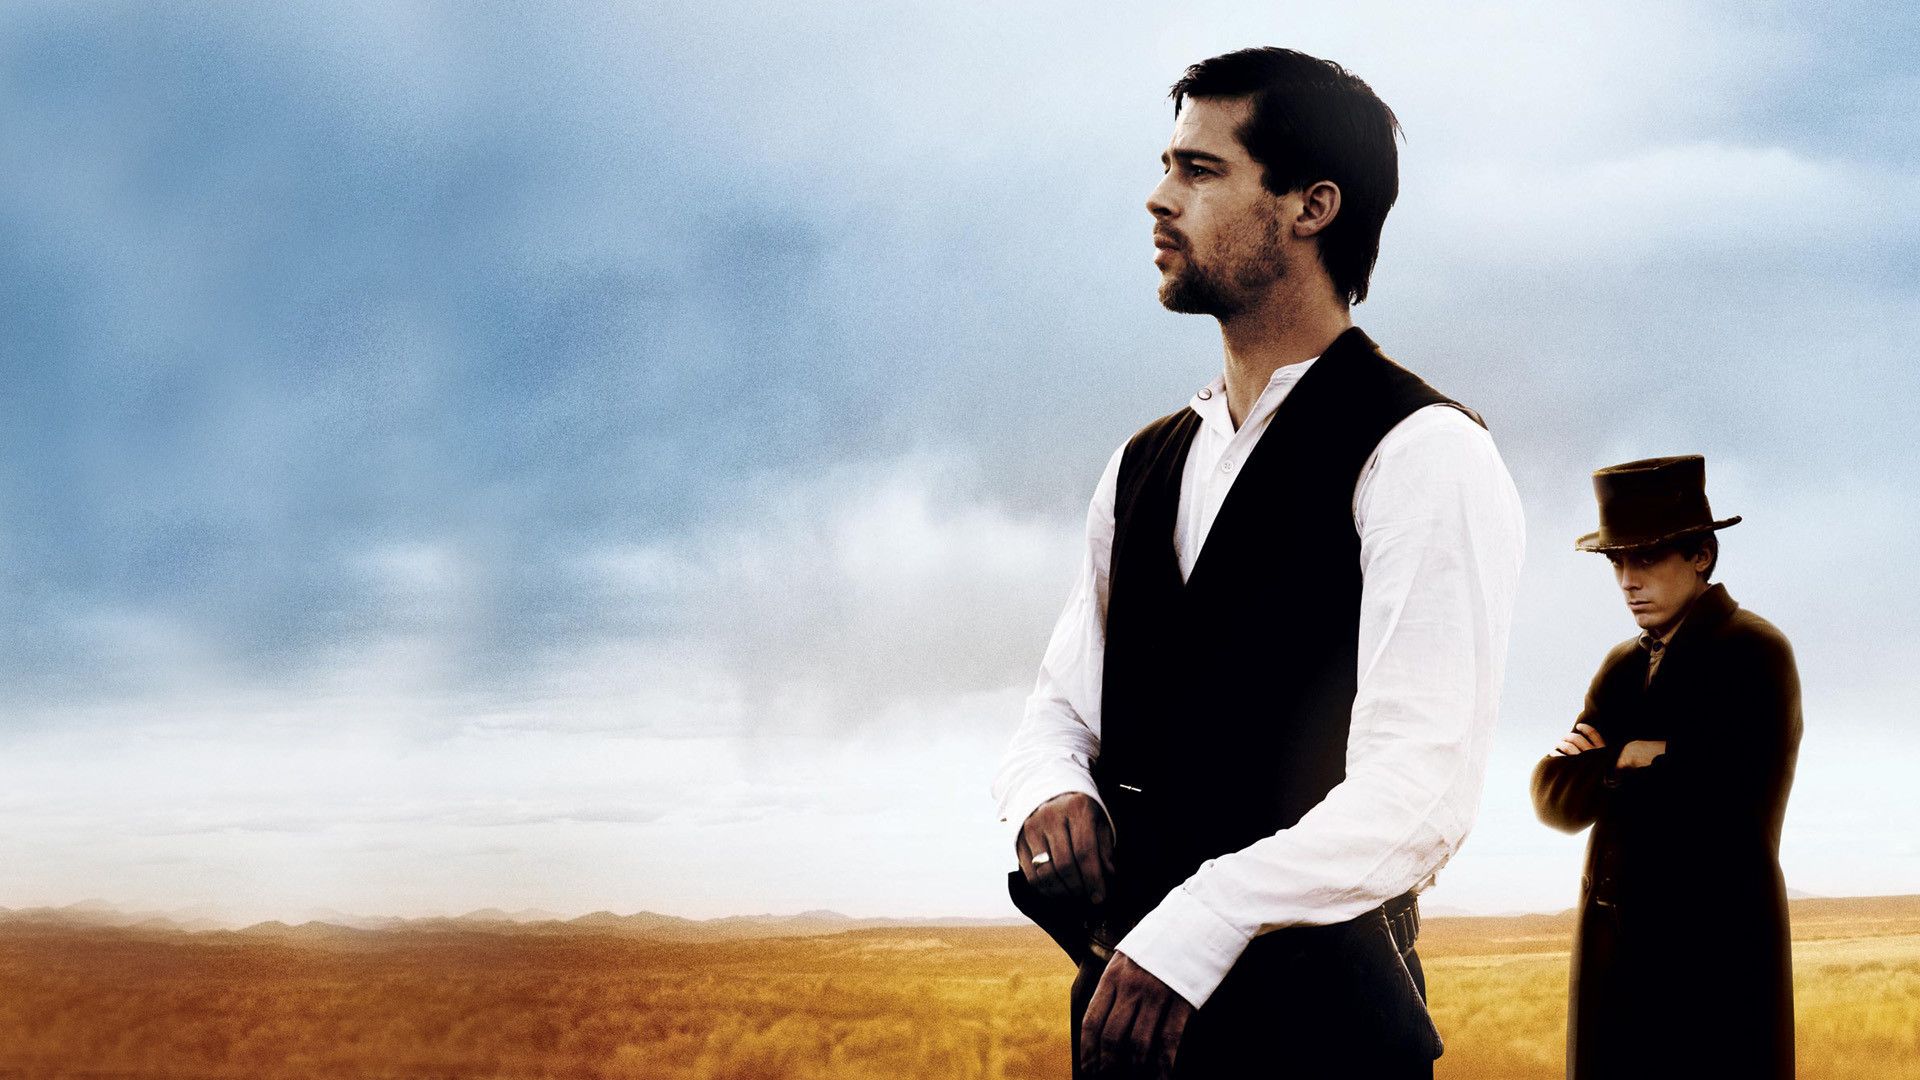 The Assassination of Jesse James by the Coward Robert Ford background